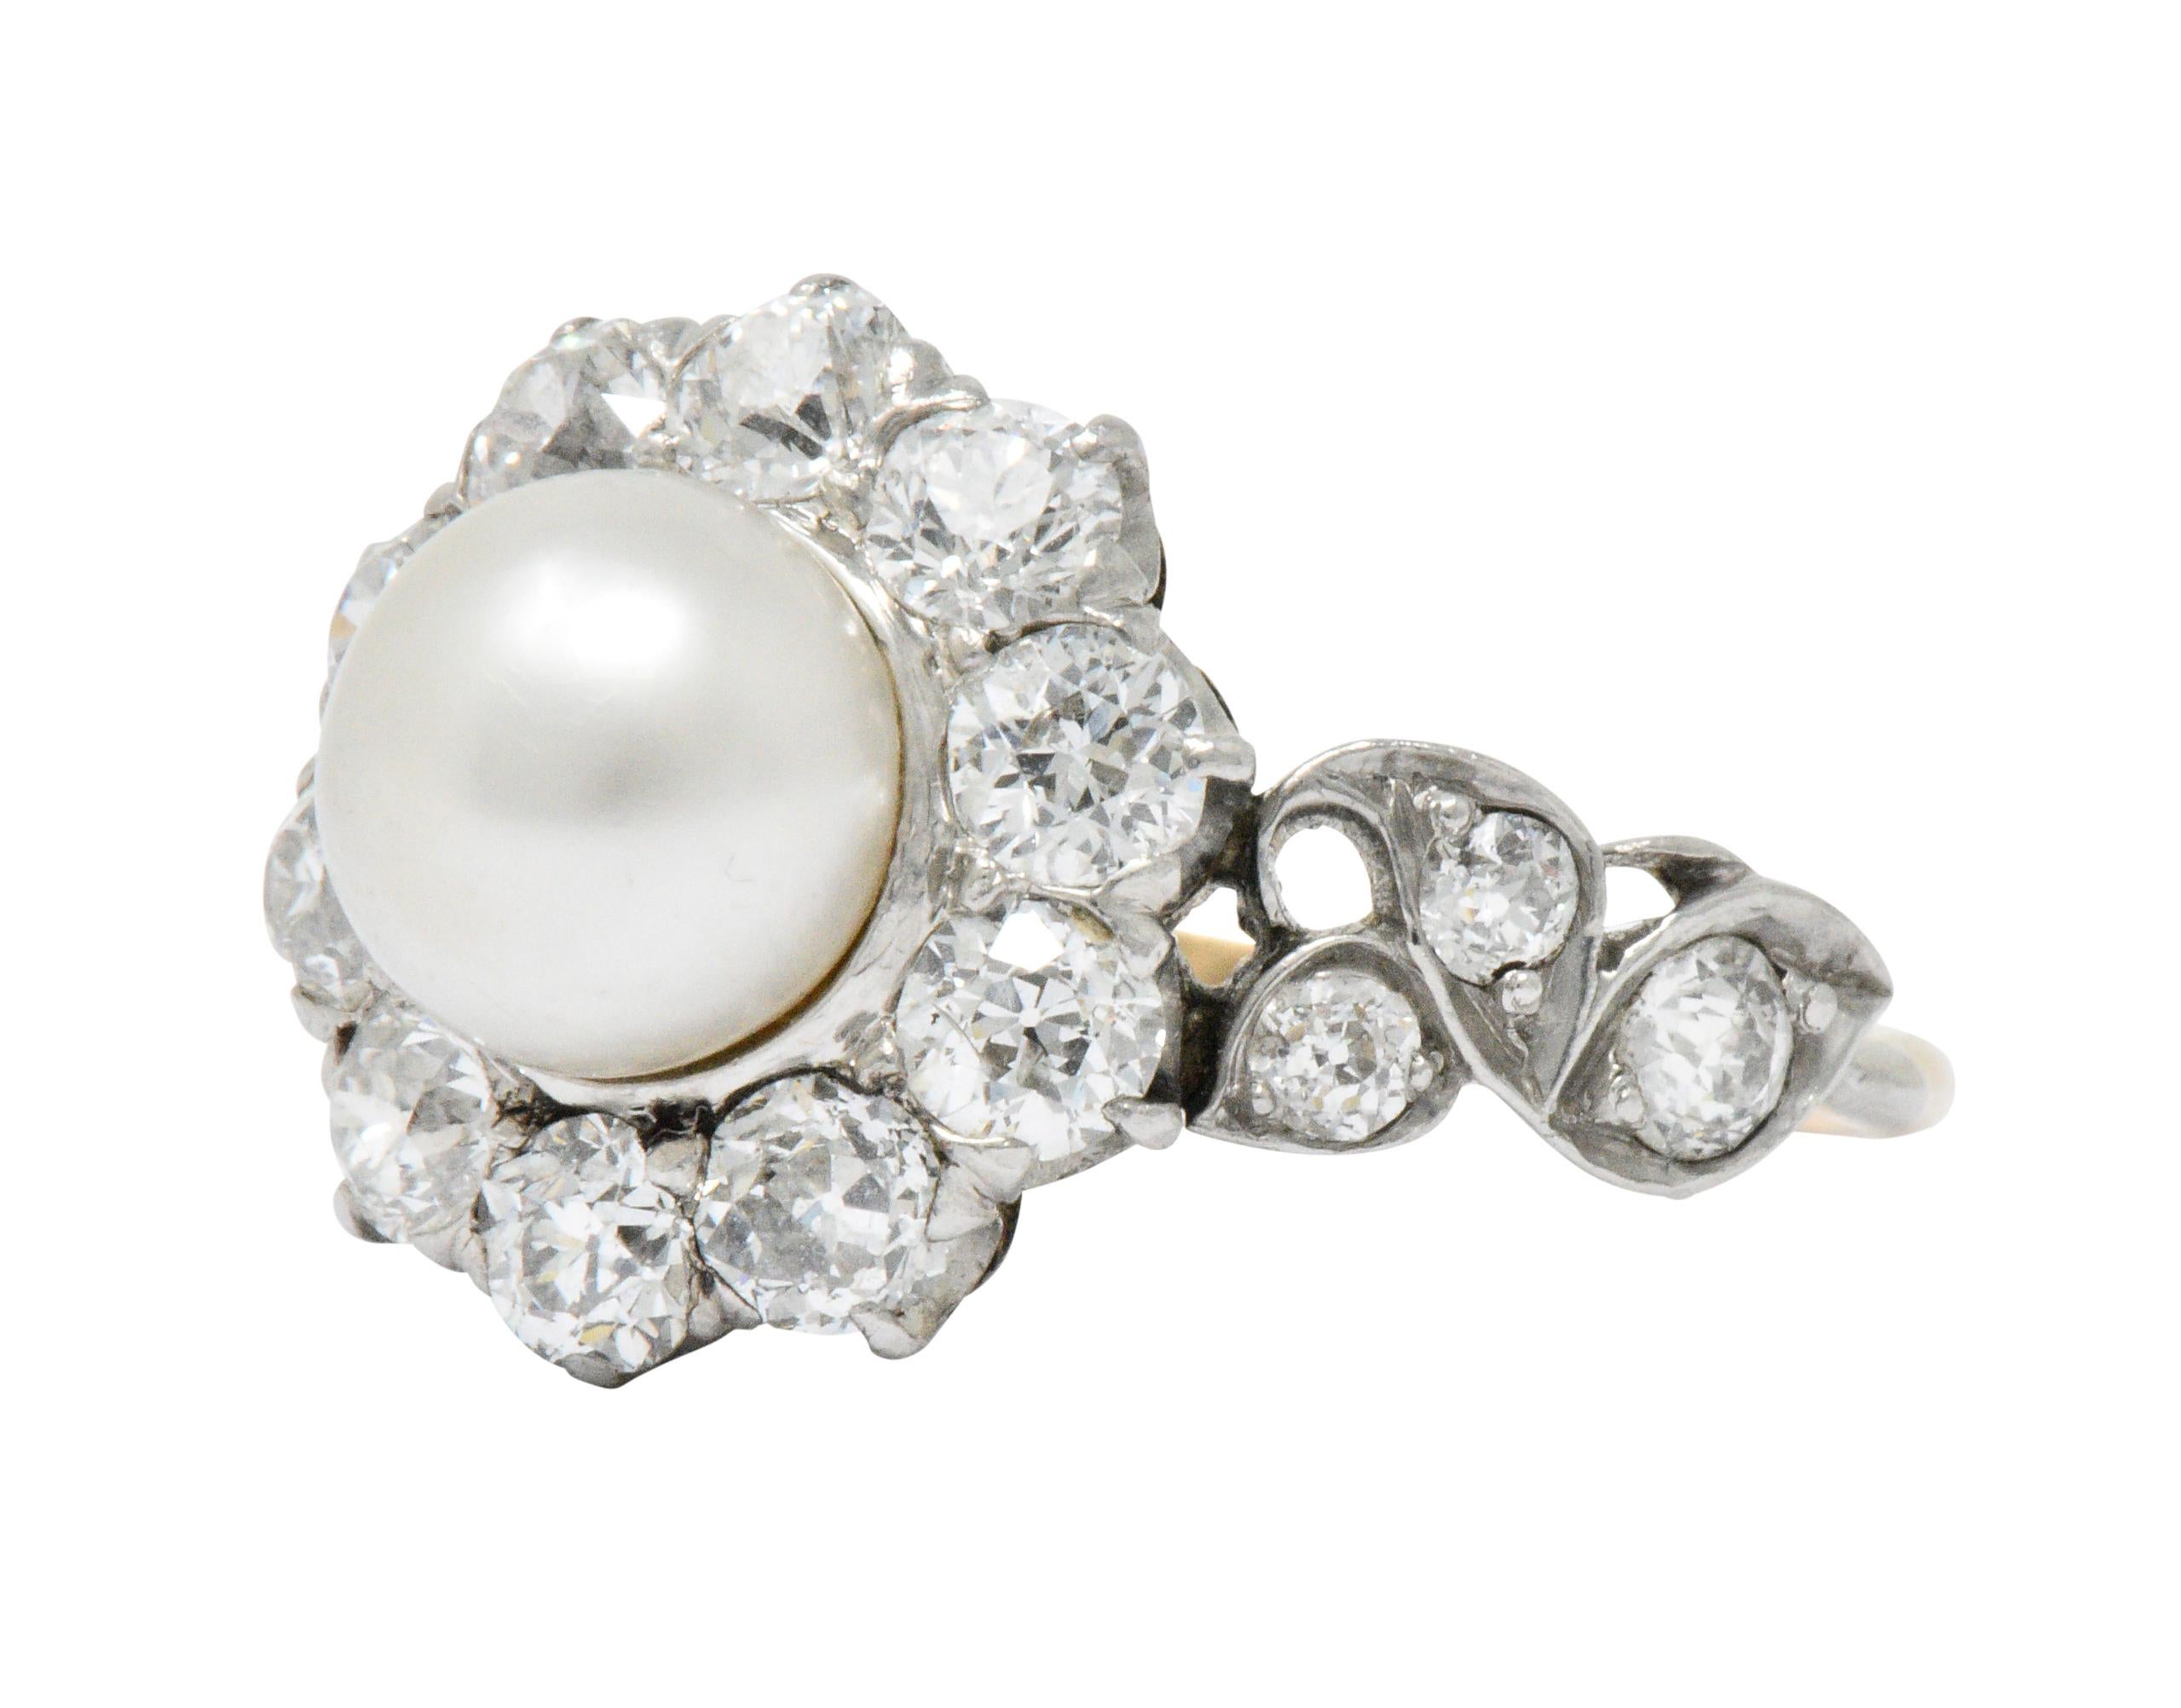 Centering a button shaped natural pearl, measuring approximately 7.0 mm, white body color with very good luster and surface quality

Old mine cut diamond surround and side accents, weighing approximately 1.50 carats total, G/H color and VS to SI